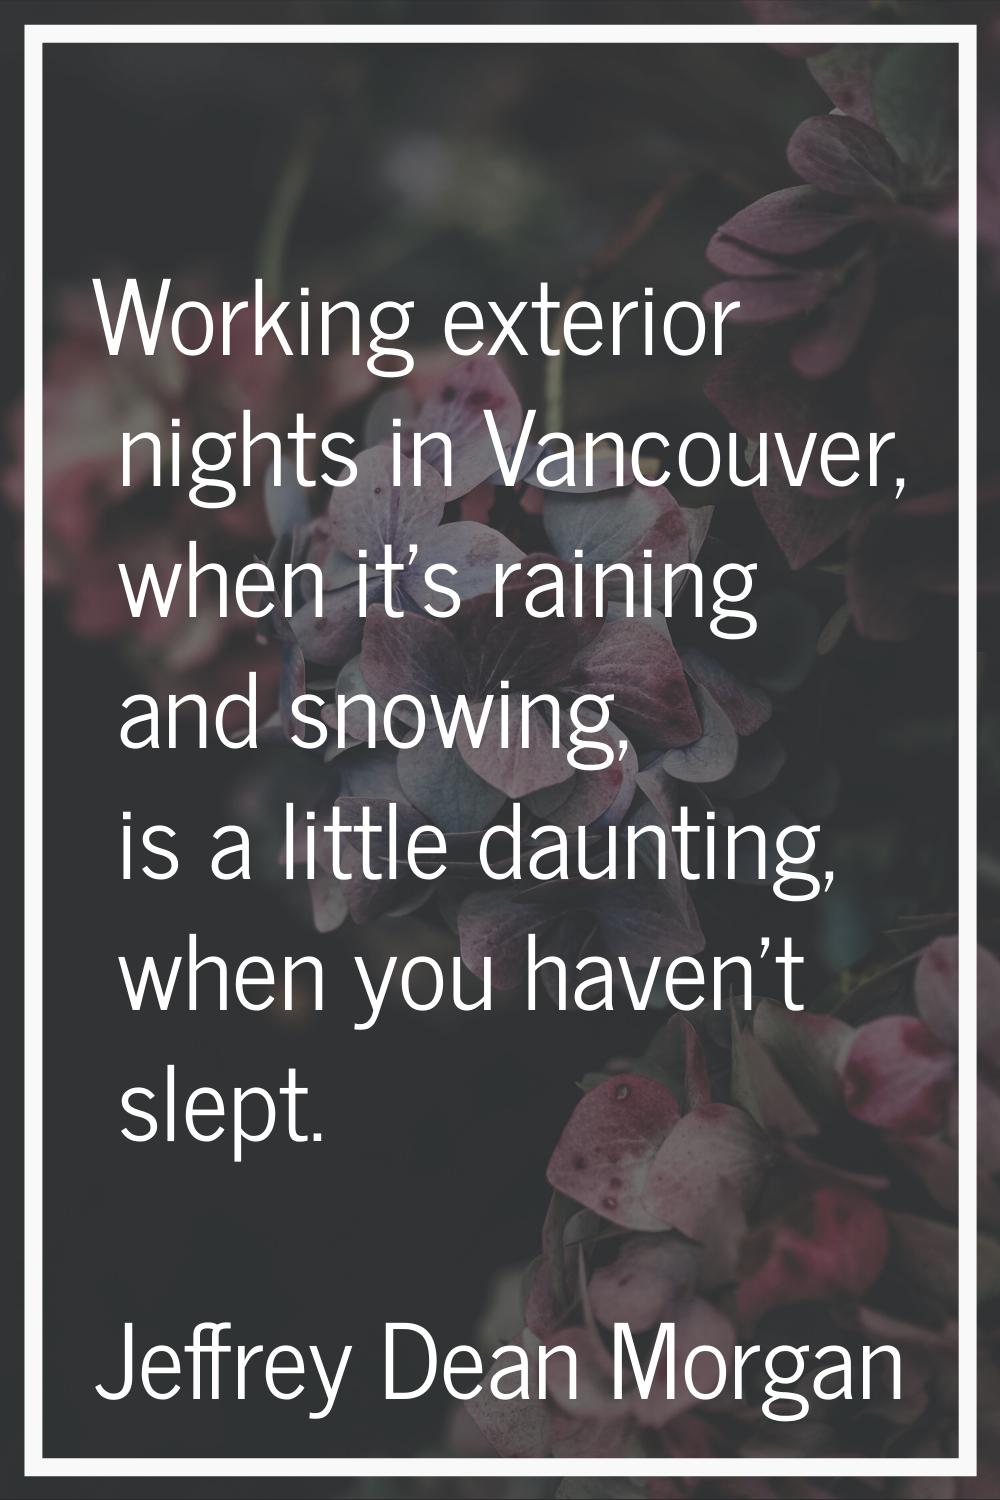 Working exterior nights in Vancouver, when it's raining and snowing, is a little daunting, when you